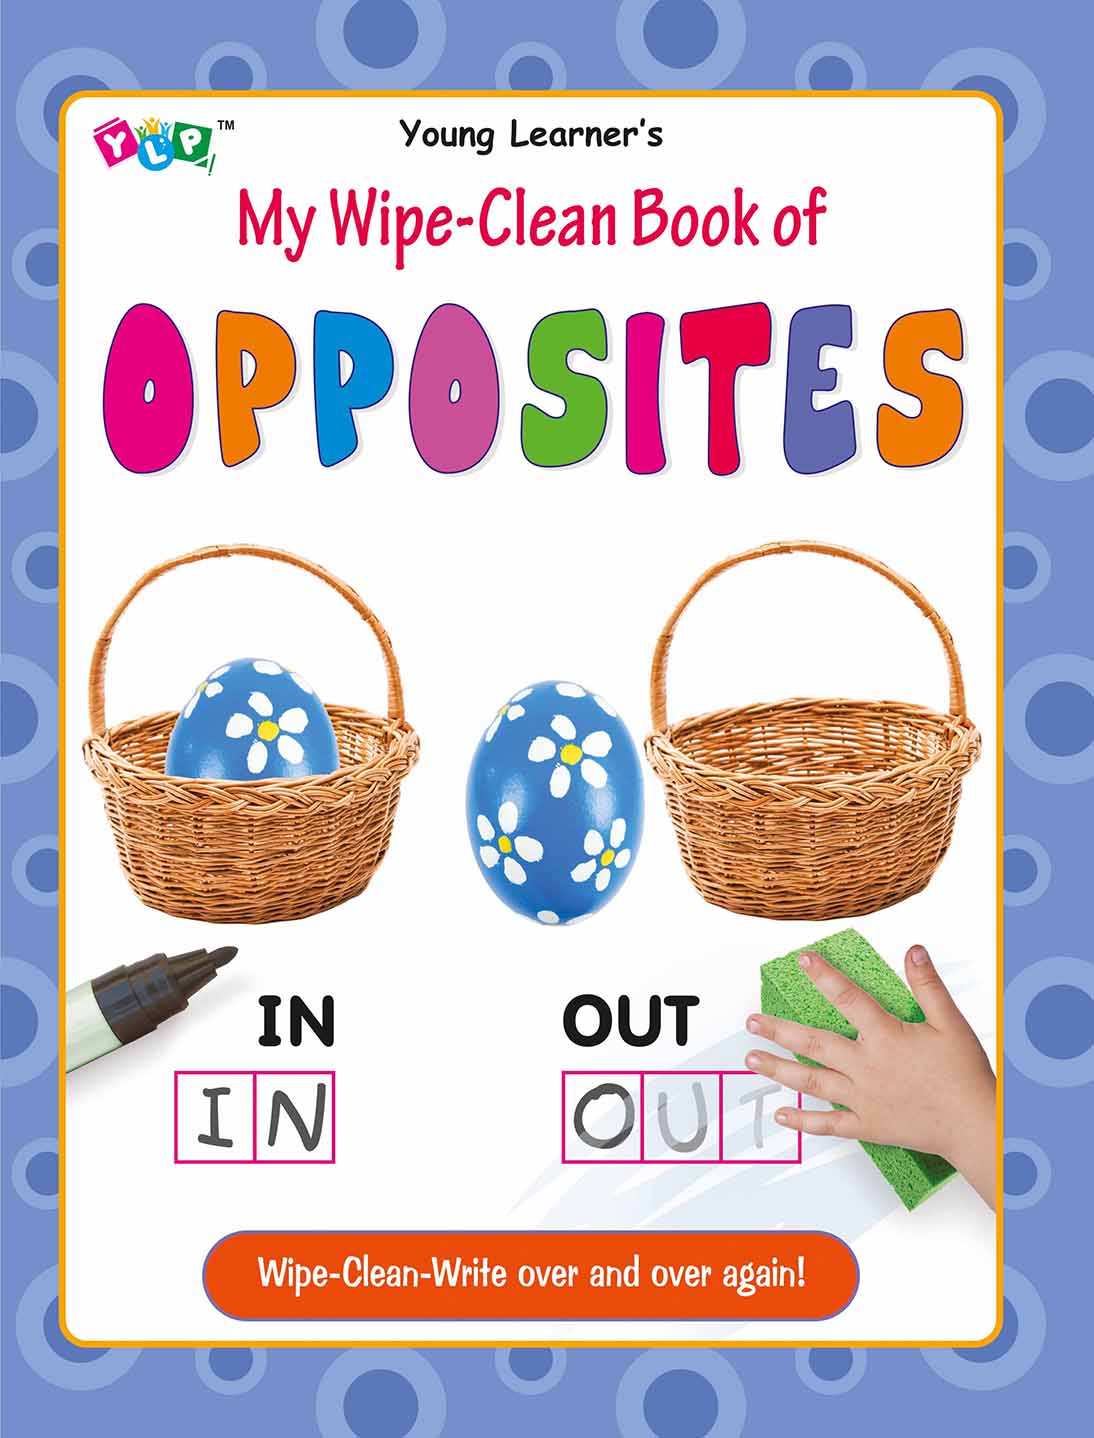 My Wipe-Clean Book of Opposites